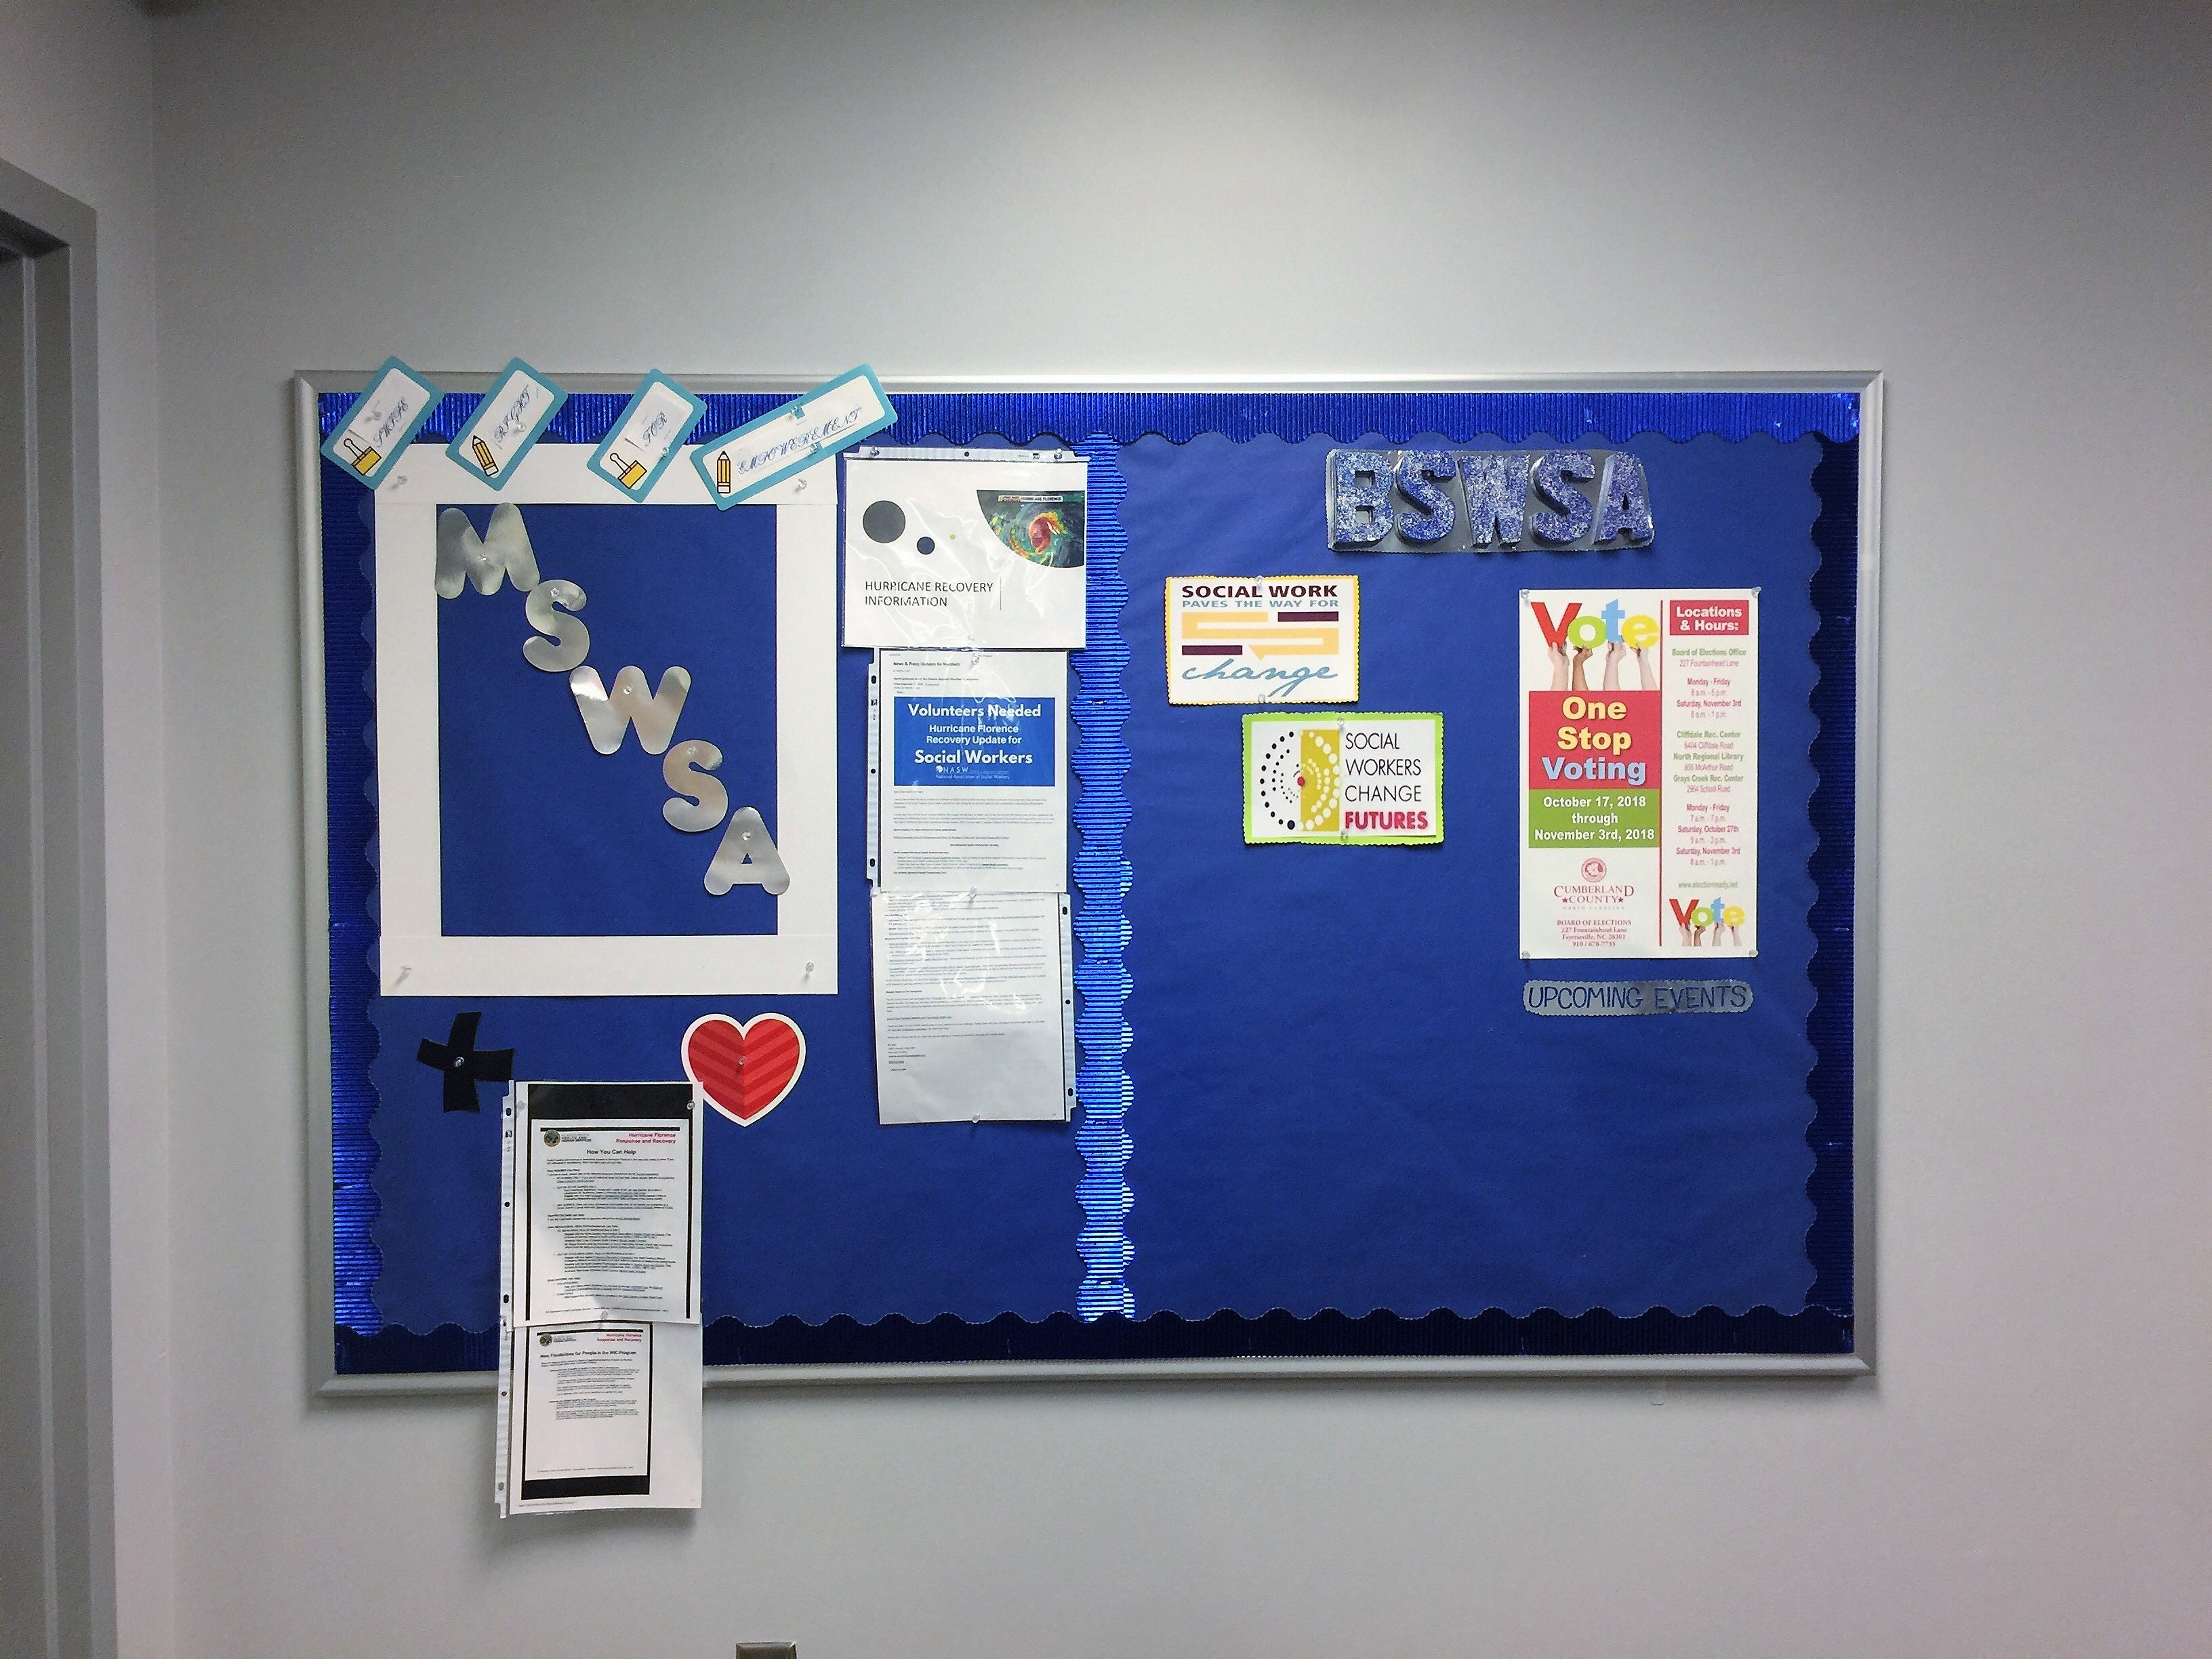 Bachelor of Social Work and Master of Social Work Student Associations Bulletin Board